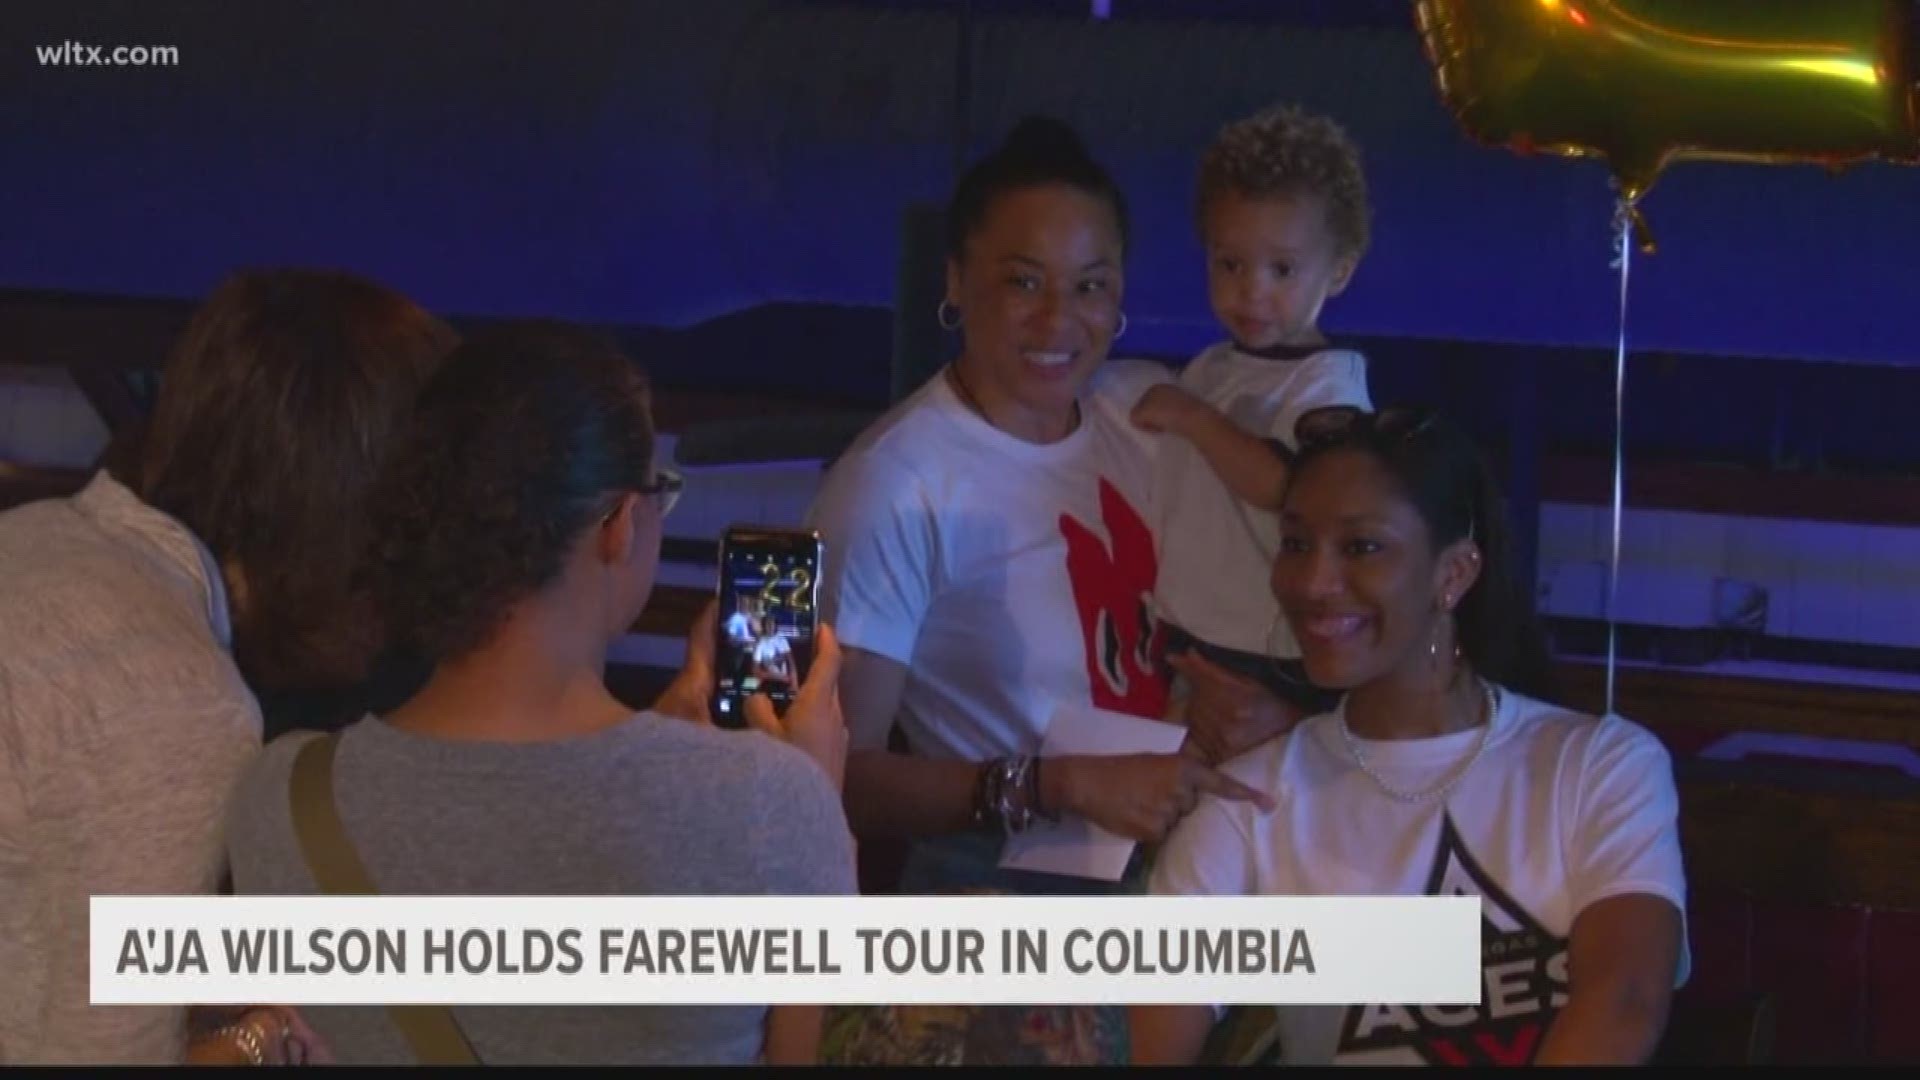 The number one pick in the WNBA draft came back home before heading to Las Vegas for a farewell tour. Gamecock Nation was able to see their star one more time.